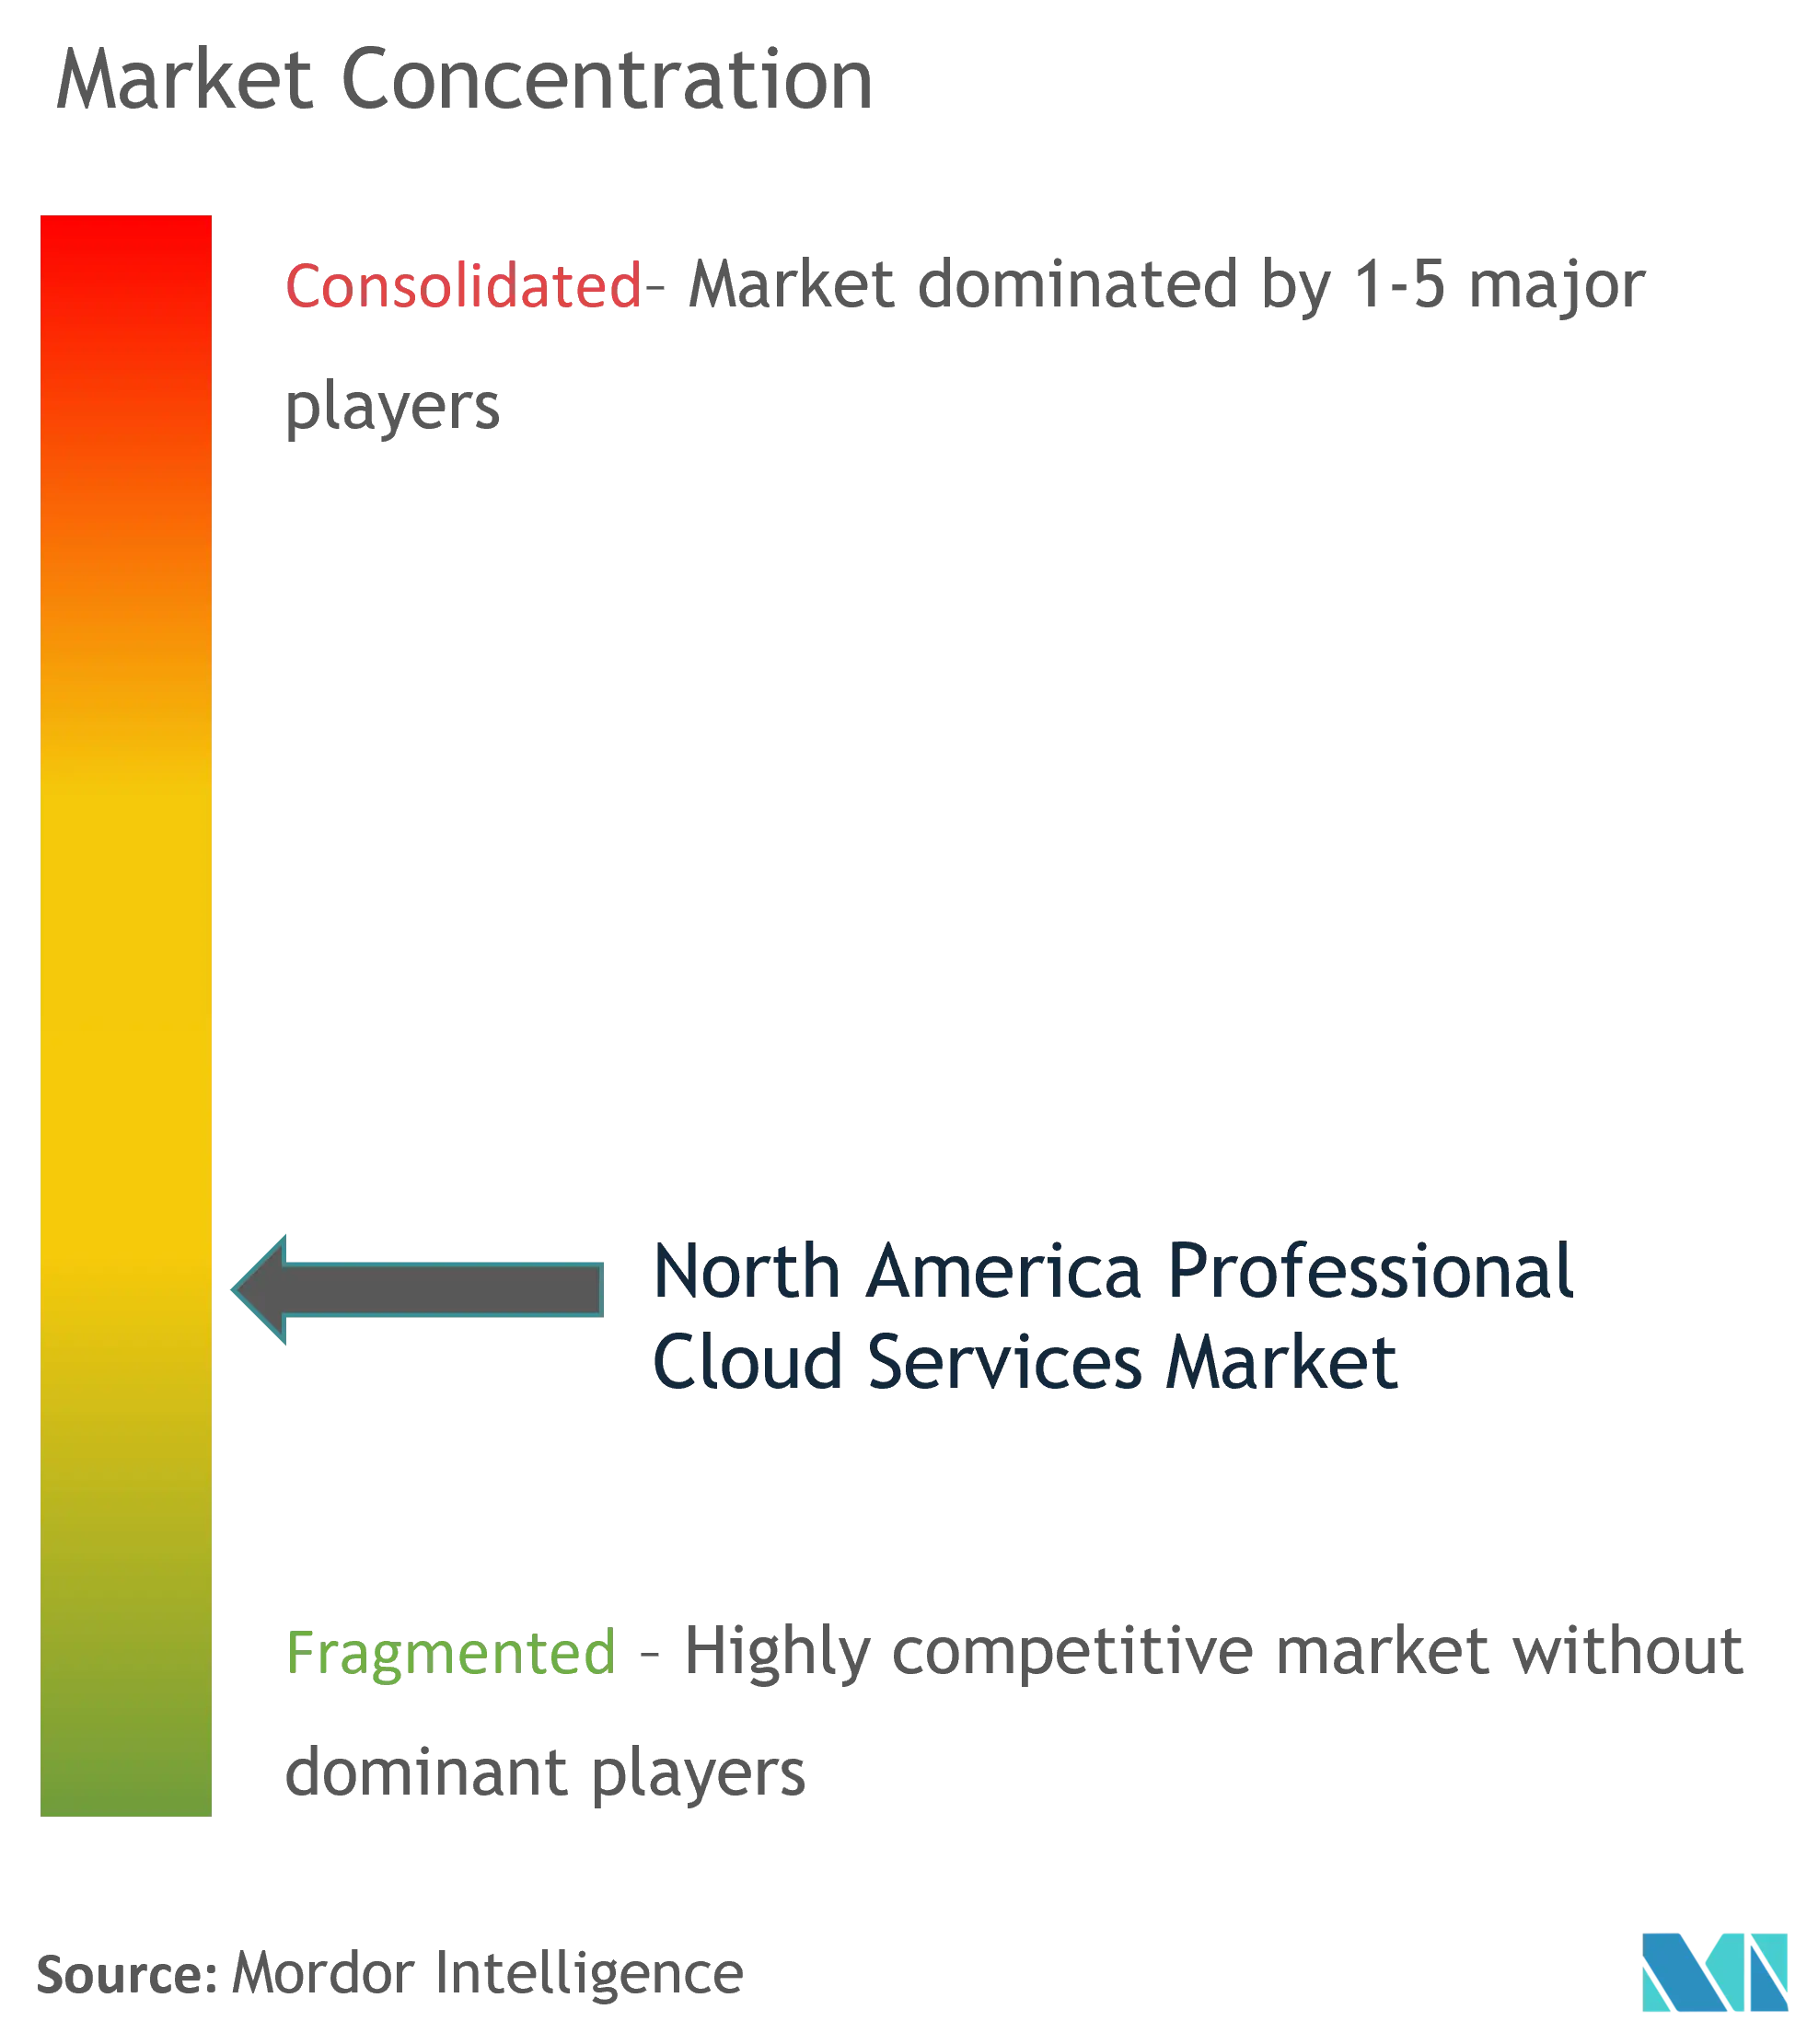 North America Professional Cloud Services Market Concentration